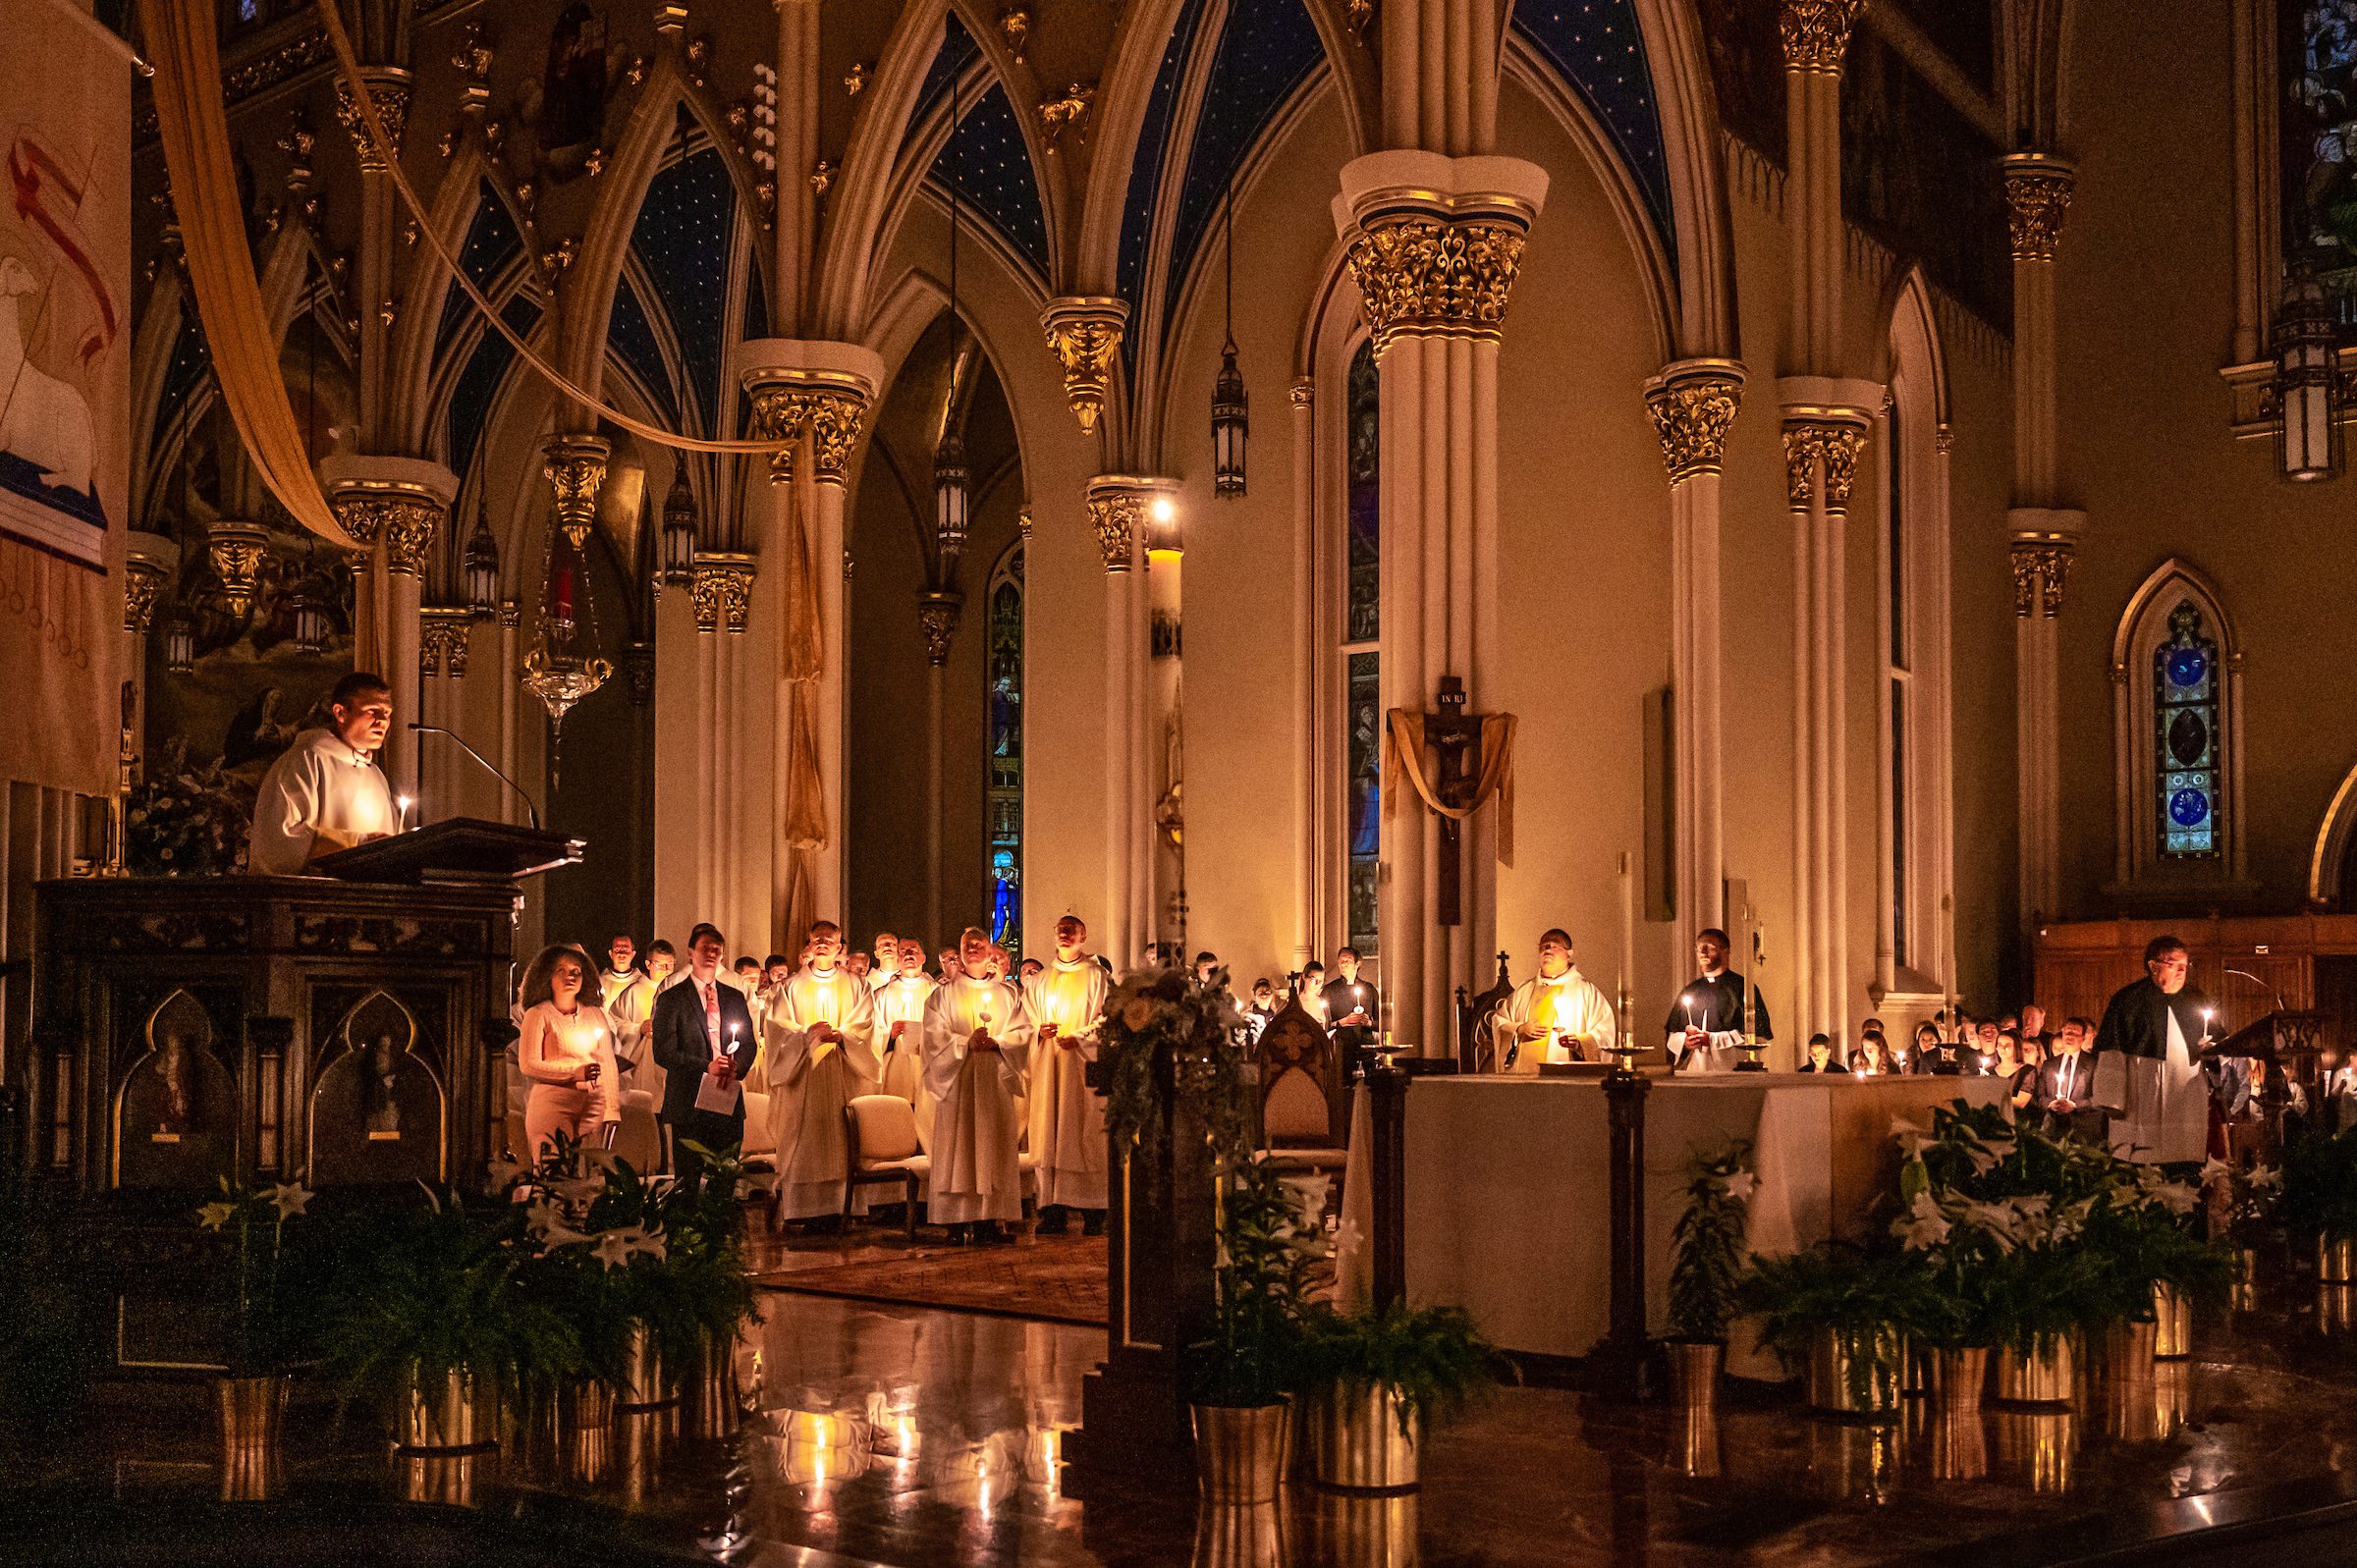 Holy Saturday Mass from the Basilica of the Sacred Heart